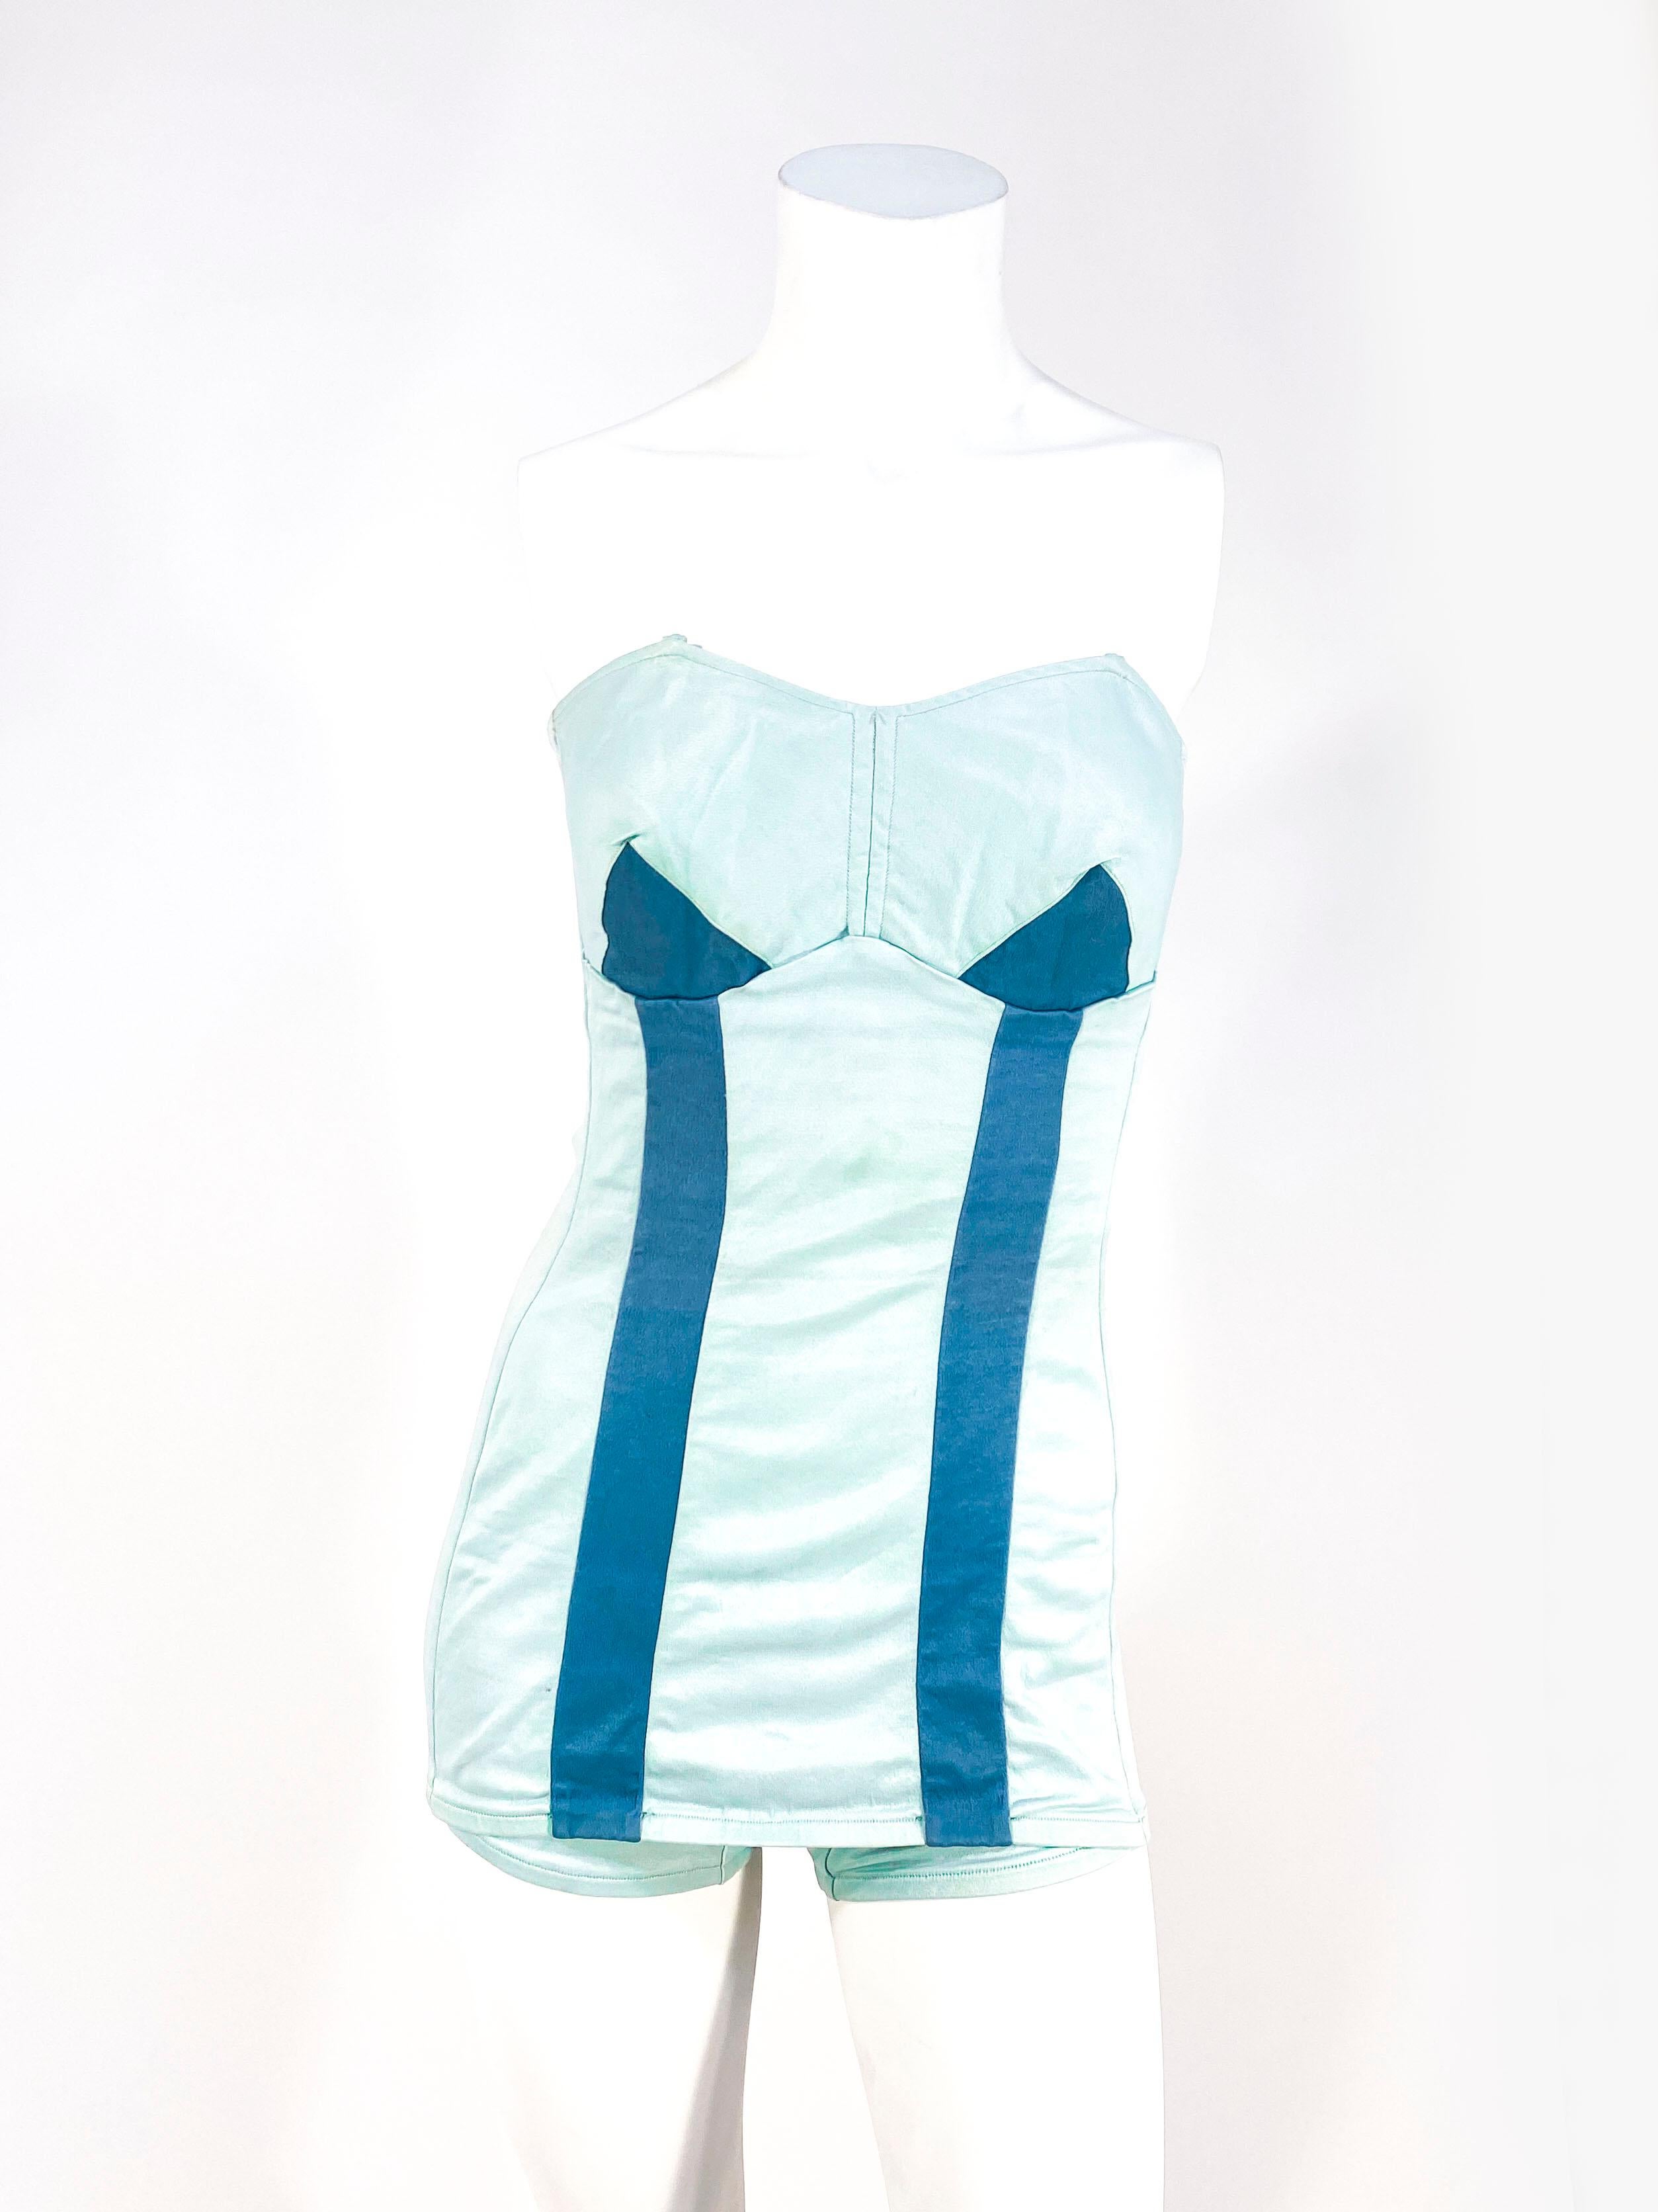 1950s Catalina robins egg blue bathing suit with a double arrow accent in teal. The interior tag says 